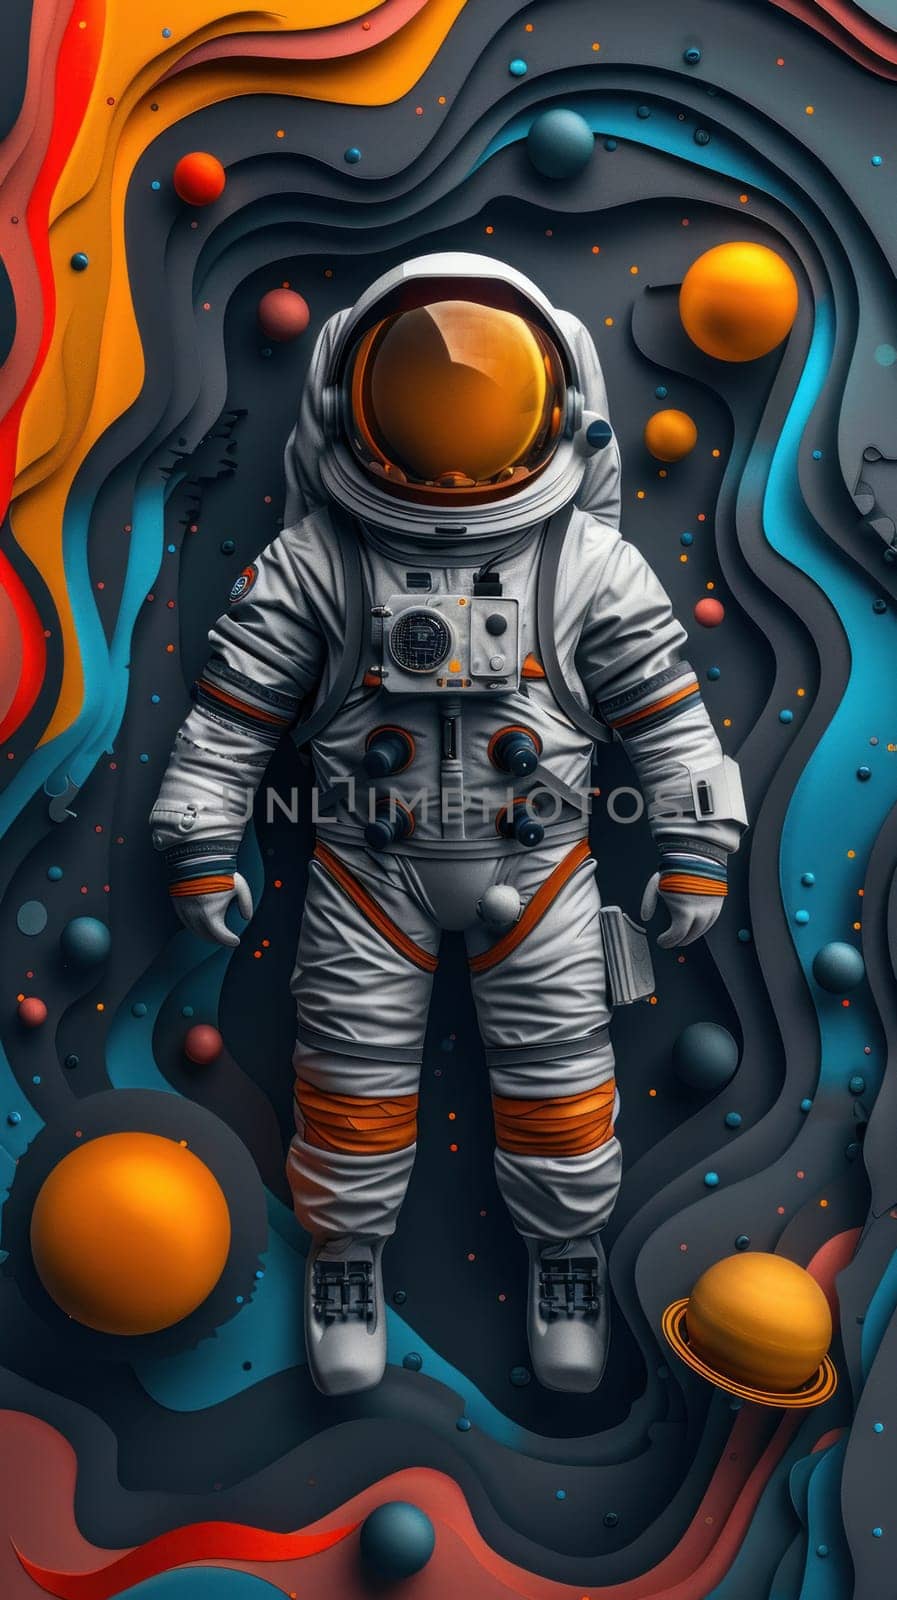 A colorful paper cutout of a man in a spacesuit standing in front of a colorful by golfmerrymaker